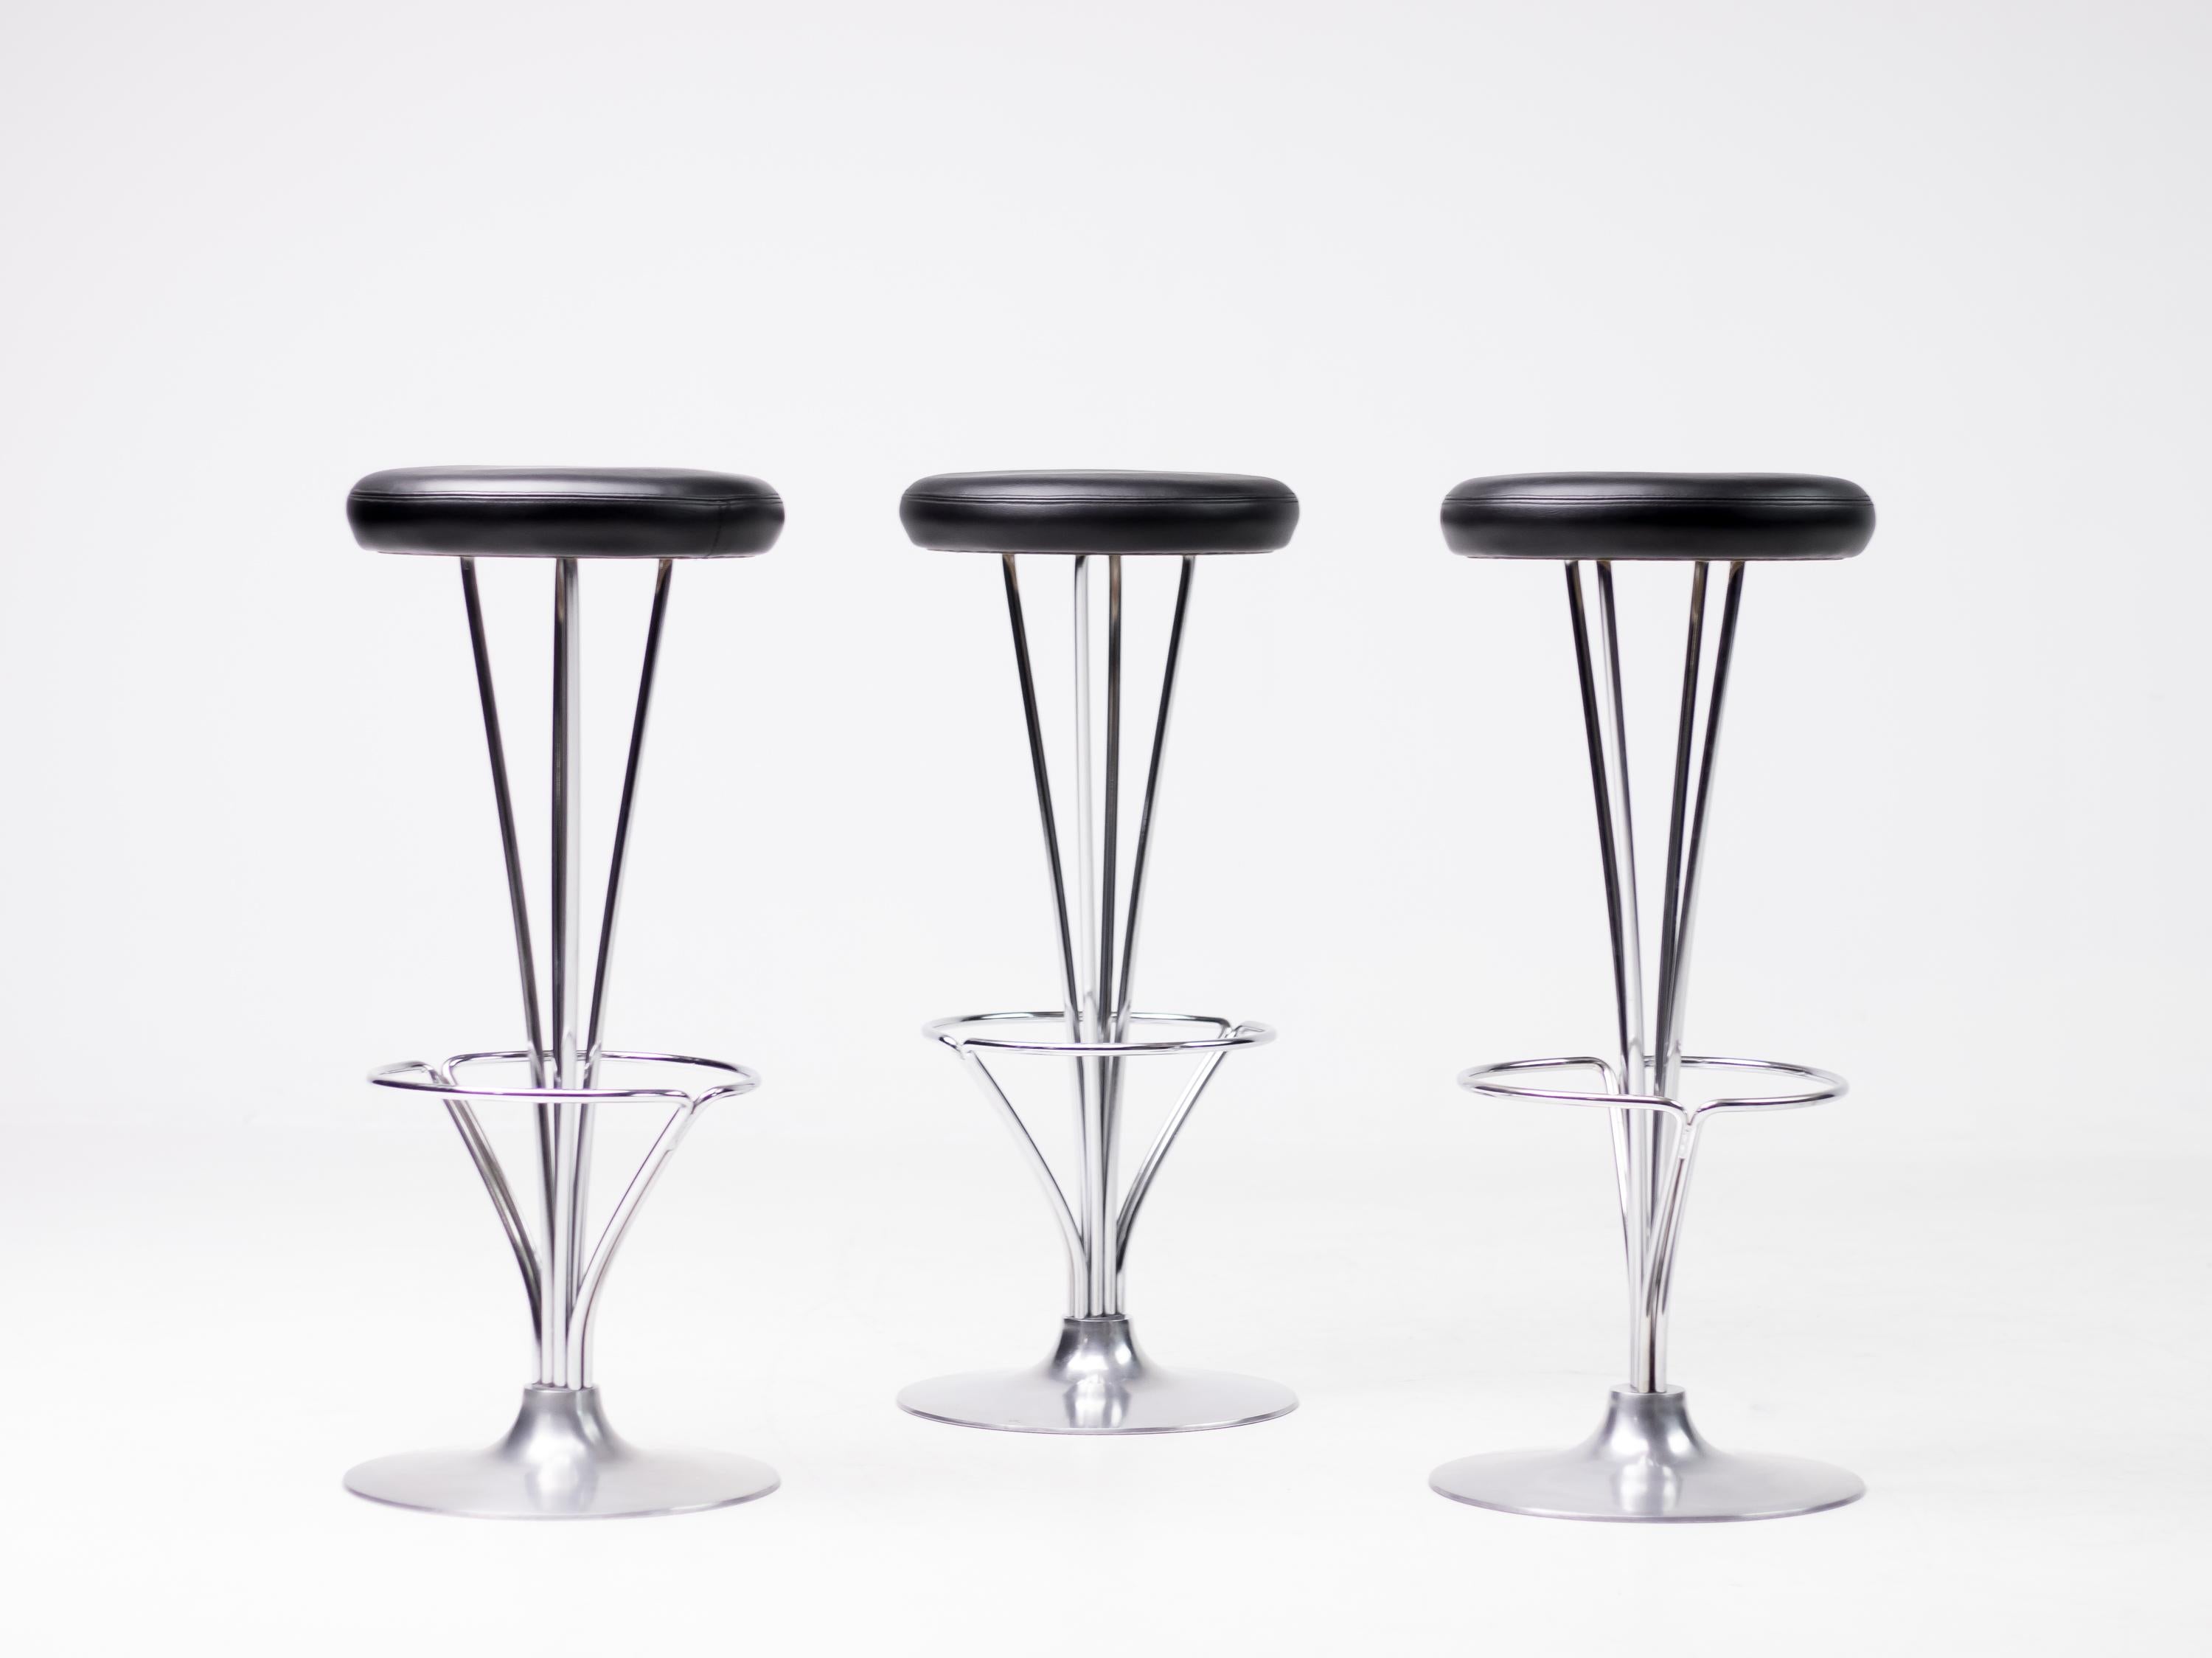 These elegant bar stools where designed by Piet Hein for Fritz Hansen, Denmark.
They are in great original condition with black leather seats.
Marked with Fritz Hansen label at the bottom of the seat.
Priced as a set.